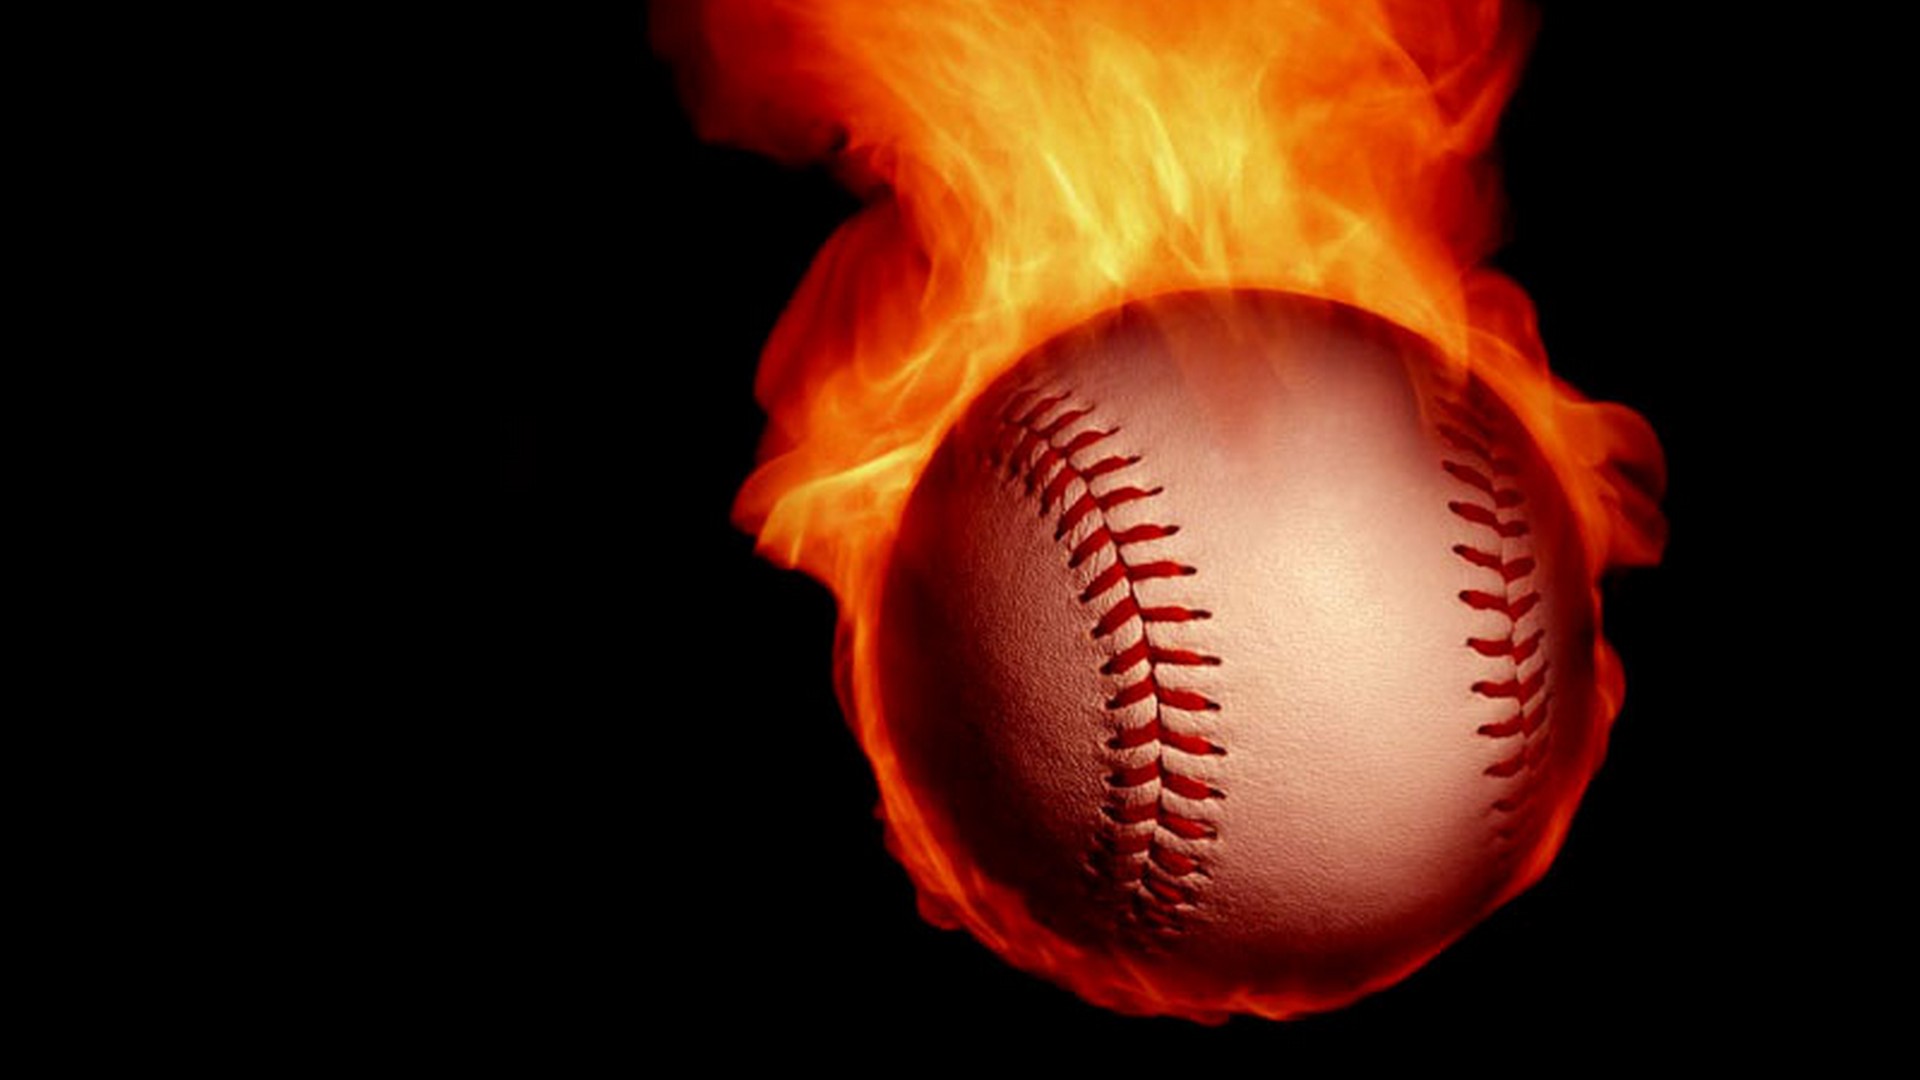 Wallpapers HD Cool Baseball with high-resolution 1920x1080 pixel. You can use this wallpaper for Mac Desktop Wallpaper, Laptop Screensavers, Android Wallpapers, Tablet or iPhone Home Screen and another mobile phone device